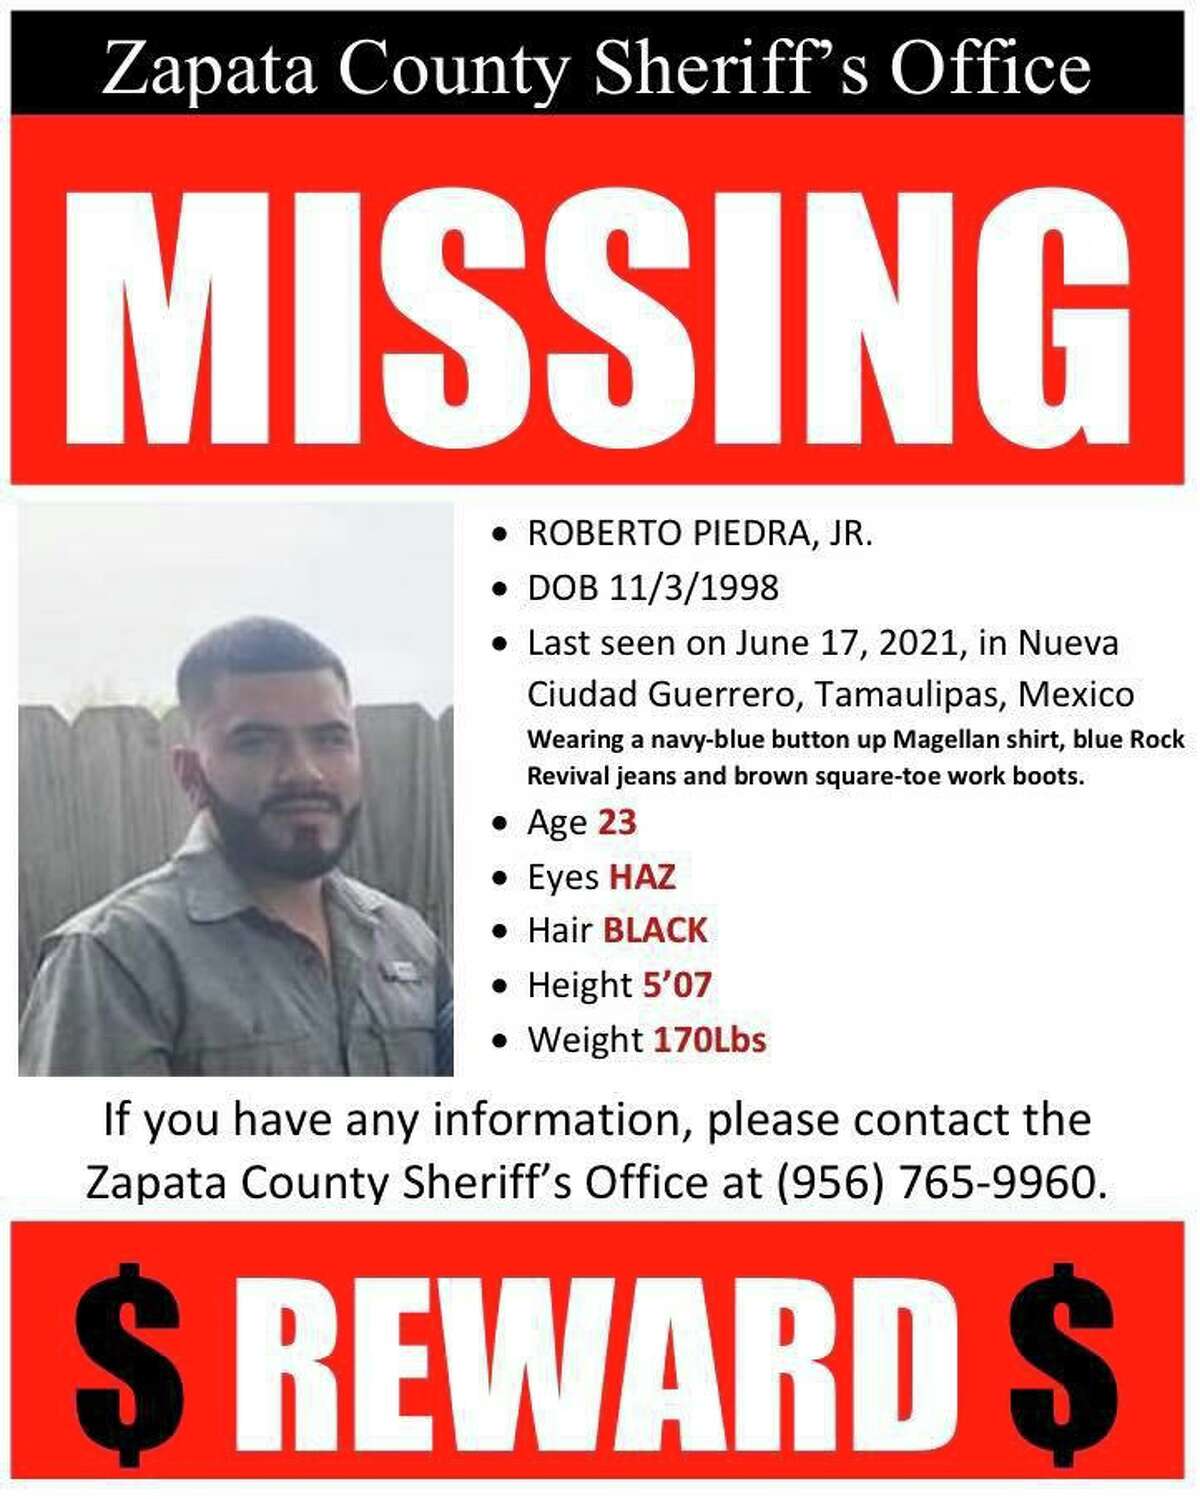 The Zapata County Sheriff’s Office needs help from the community to locate this man who went missing in Mexico. People with information on his whereabouts are asked to call the Sheriff’s Office at 956-765-9960 or Zapata Crime Stoppers at 956- 765-TIPS (8477).